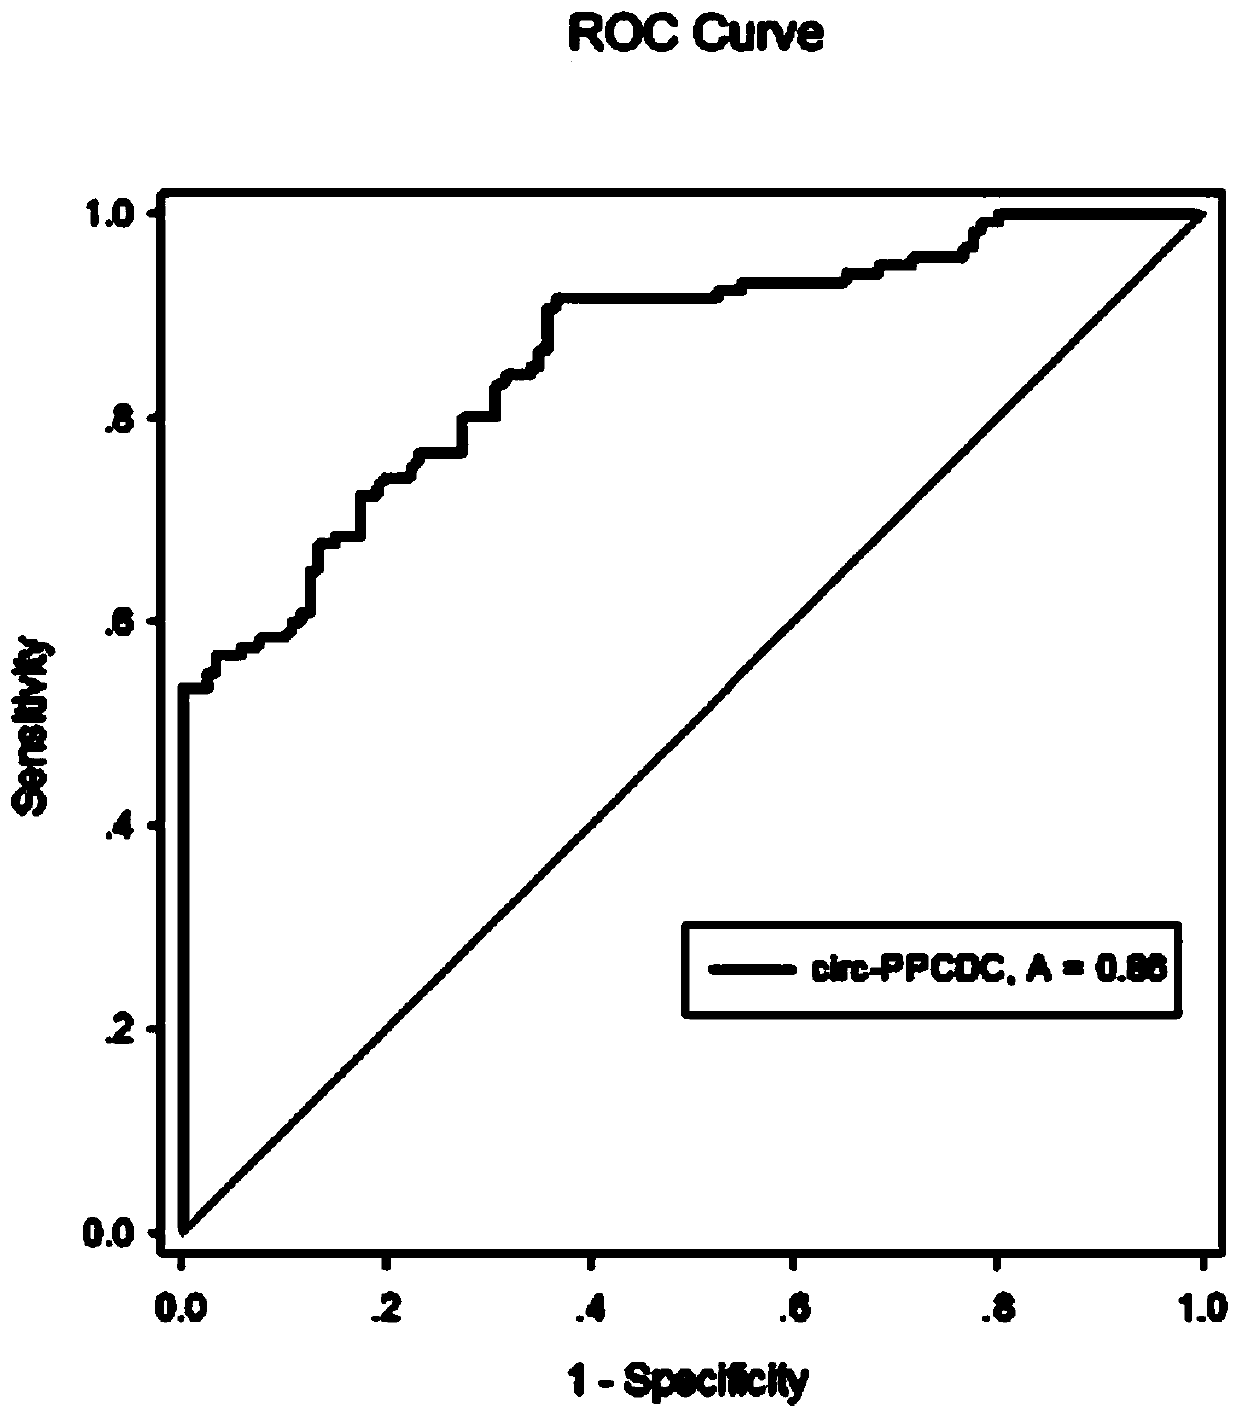 Primers and kit for detecting peripheral blood exosome circc-PPCDC and application of primer and kit in gastric cancer with liver metastasis